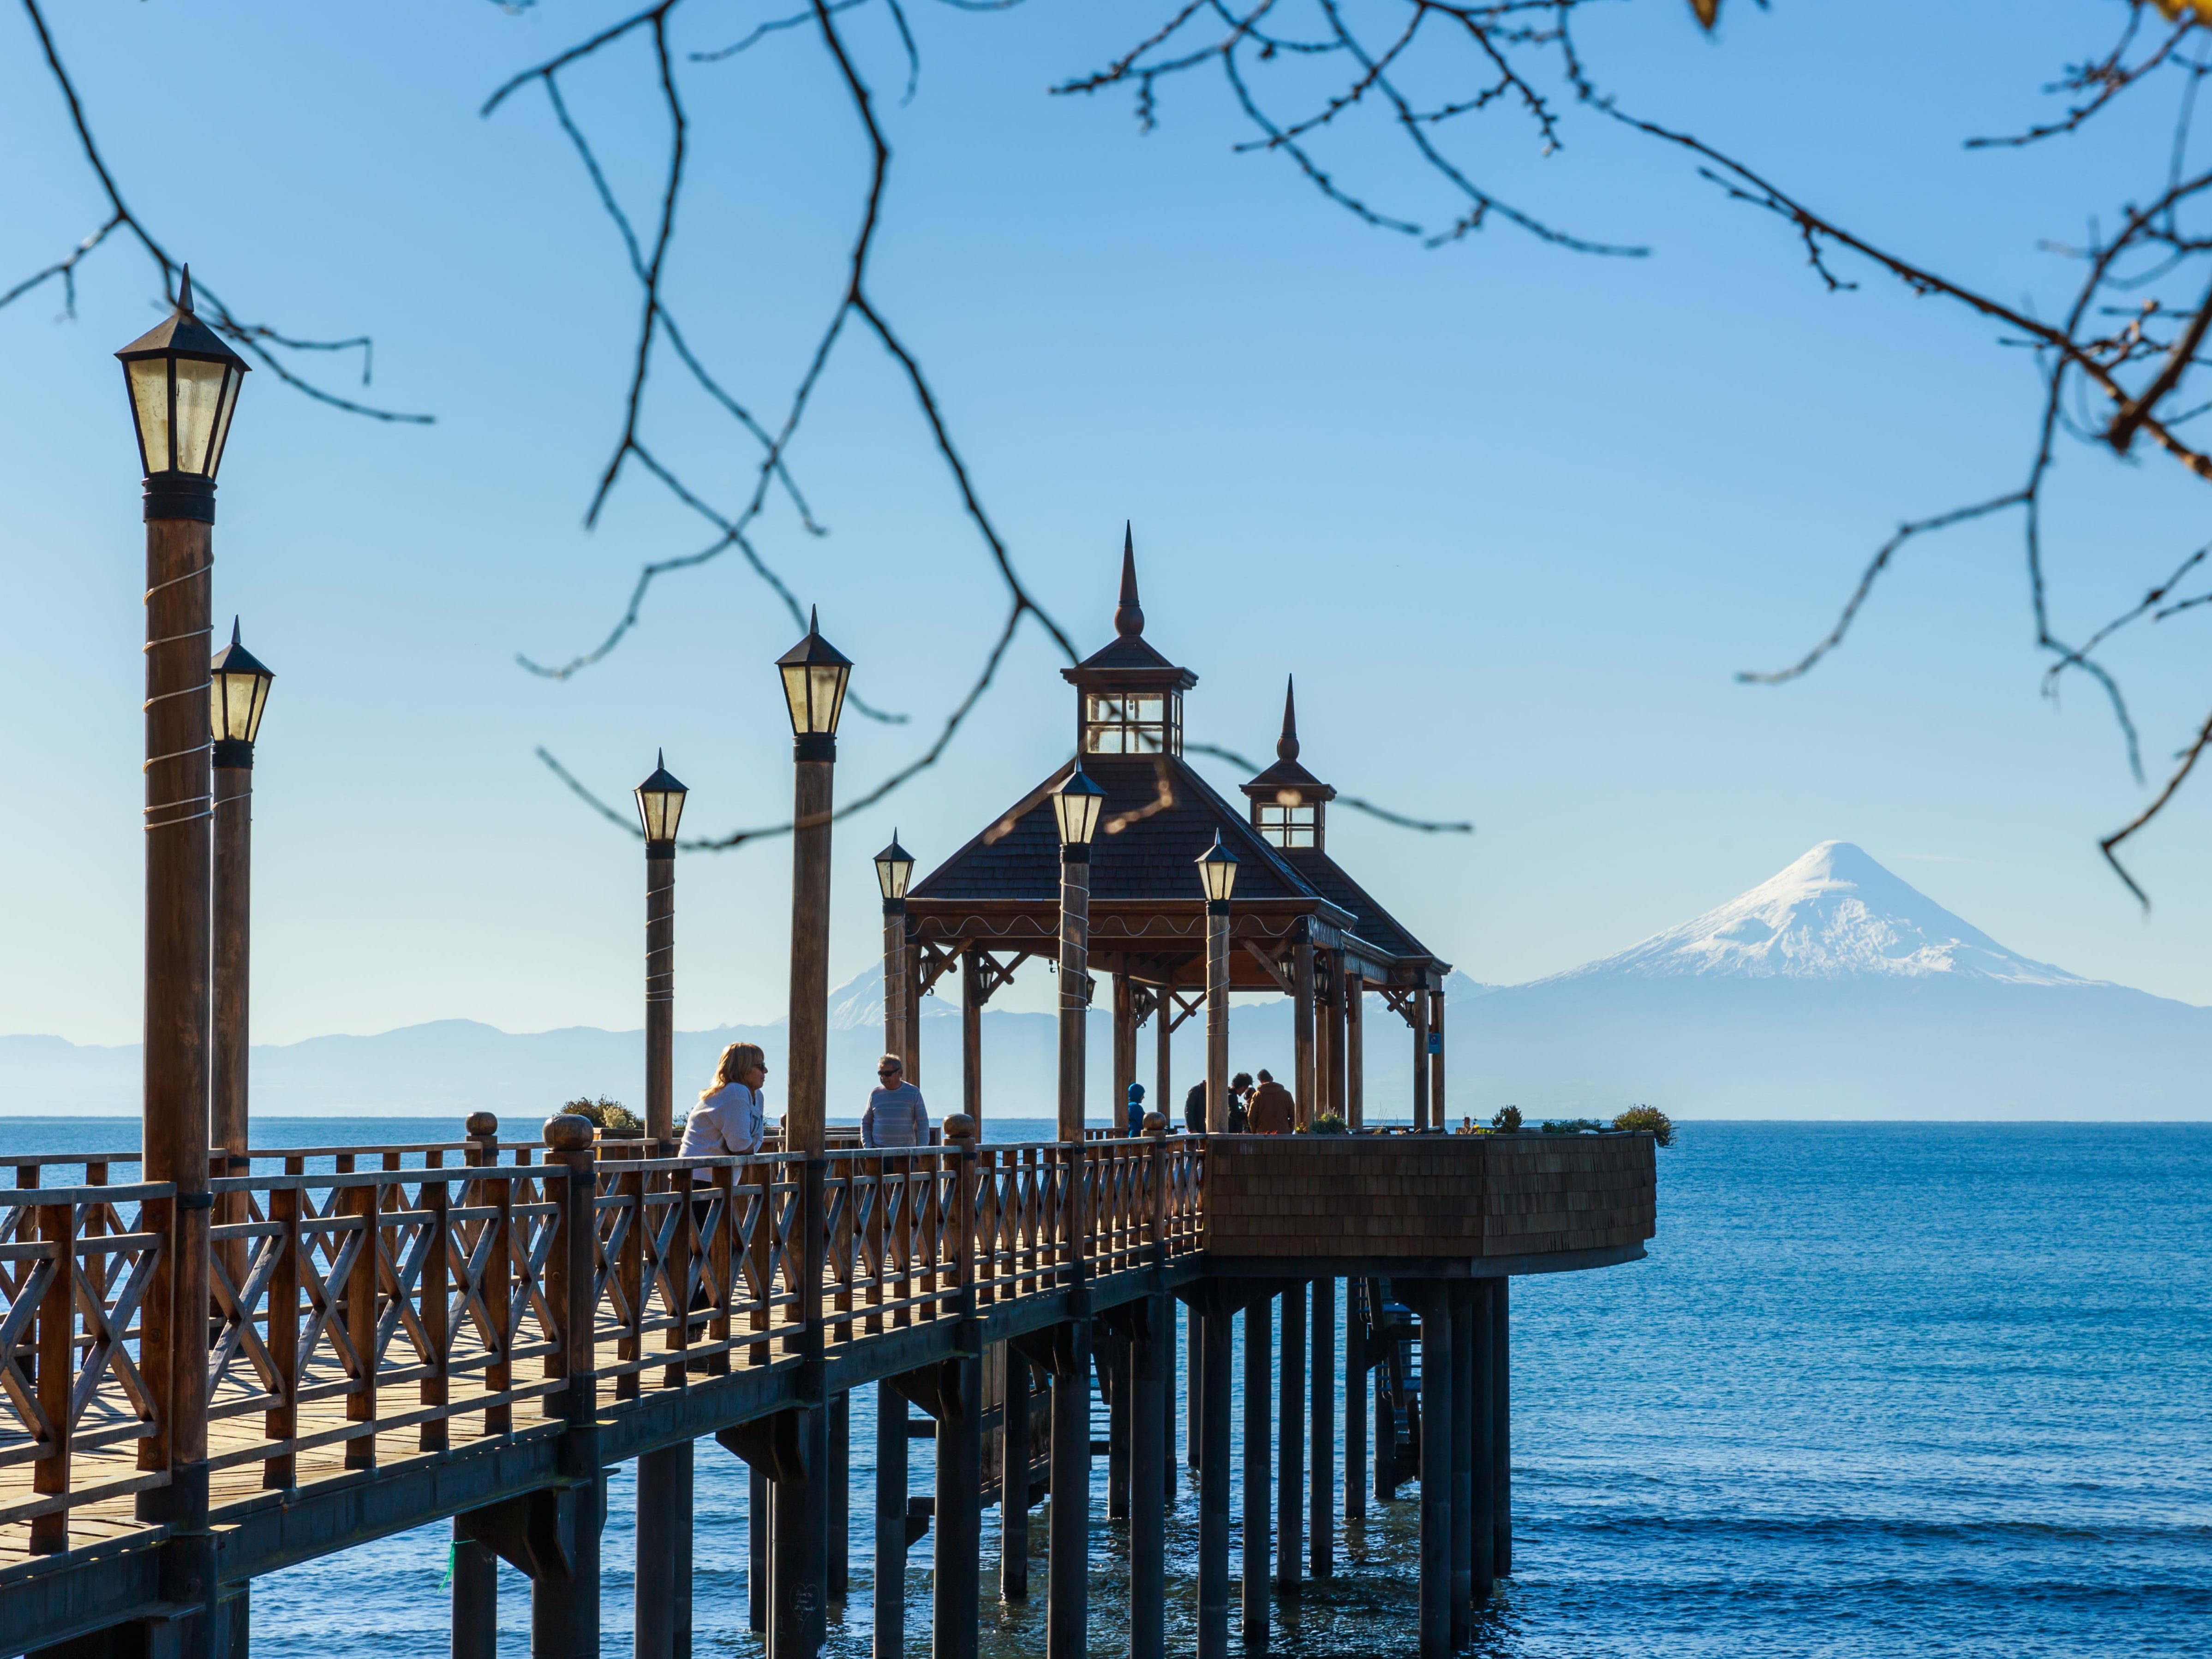 Llanquihue Lake is the second largest in Chile